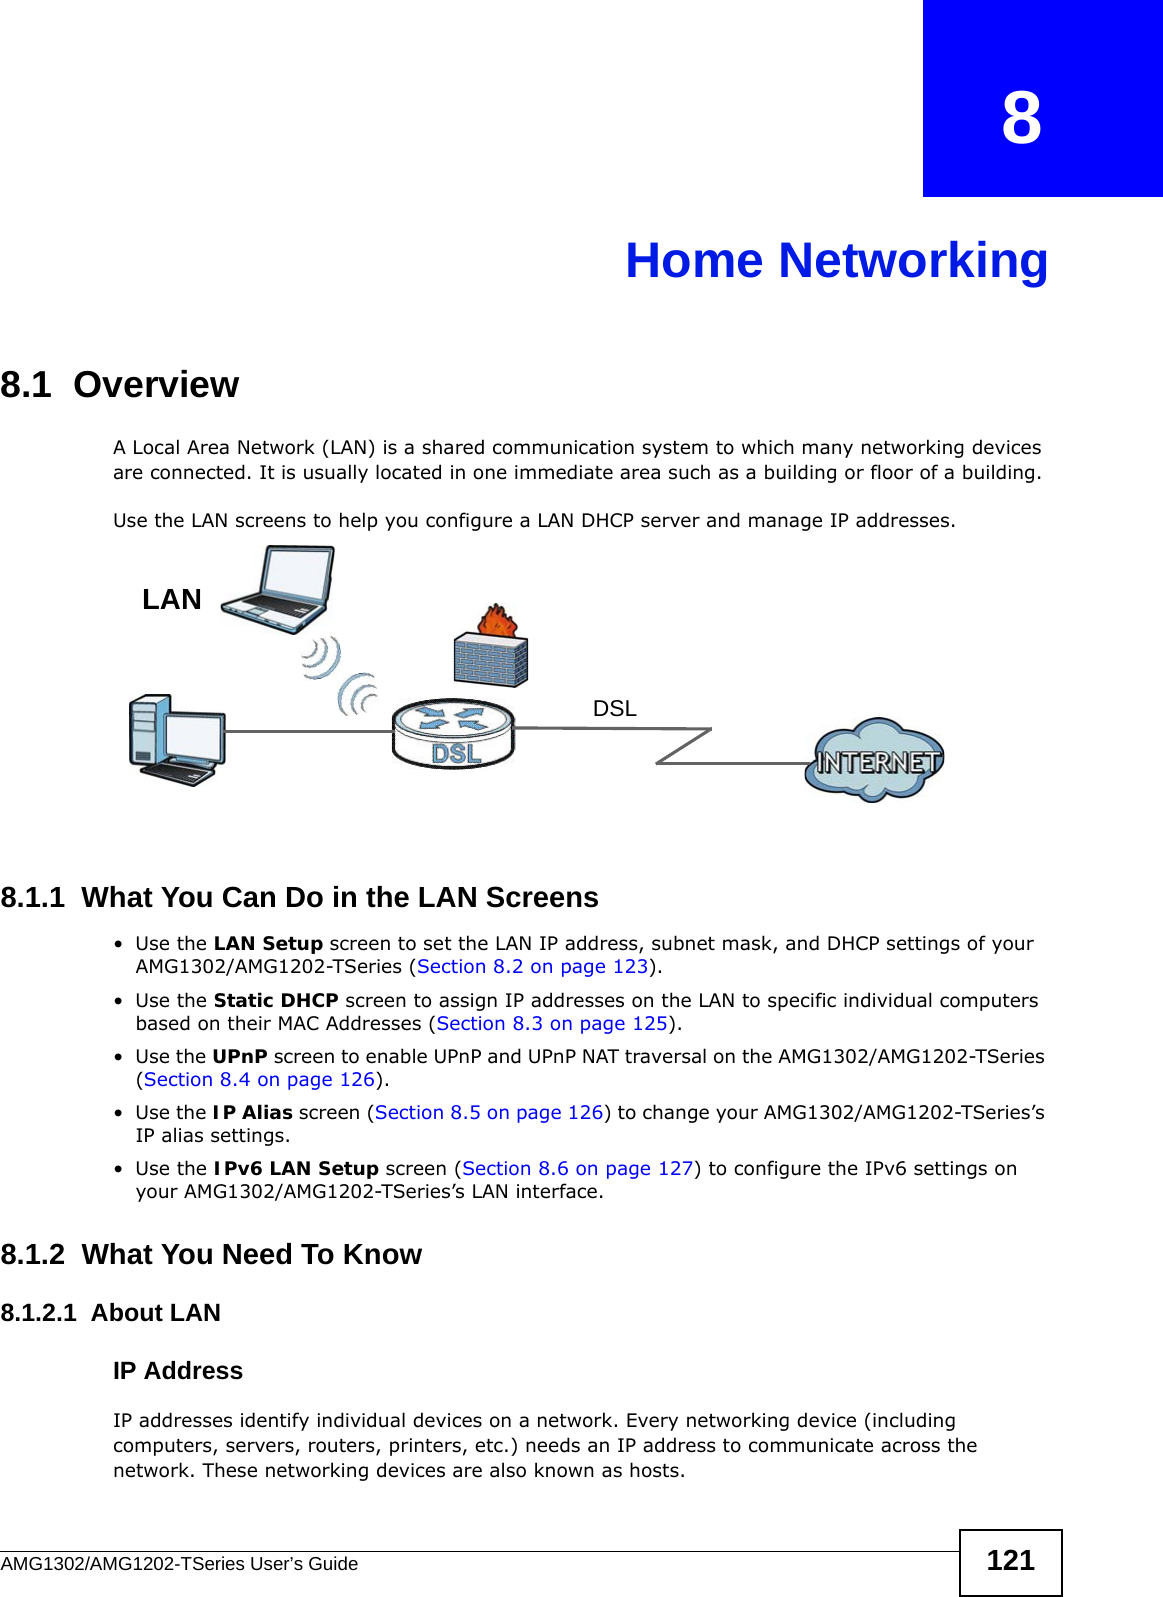 AMG1302/AMG1202-TSeries User’s Guide 121CHAPTER   8Home Networking8.1  OverviewA Local Area Network (LAN) is a shared communication system to which many networking devices are connected. It is usually located in one immediate area such as a building or floor of a building.Use the LAN screens to help you configure a LAN DHCP server and manage IP addresses.8.1.1  What You Can Do in the LAN Screens•Use the LAN Setup screen to set the LAN IP address, subnet mask, and DHCP settings of your AMG1302/AMG1202-TSeries (Section 8.2 on page 123).•Use the Static DHCP screen to assign IP addresses on the LAN to specific individual computers based on their MAC Addresses (Section 8.3 on page 125). •Use the UPnP screen to enable UPnP and UPnP NAT traversal on the AMG1302/AMG1202-TSeries (Section 8.4 on page 126).•Use the IP Alias screen (Section 8.5 on page 126) to change your AMG1302/AMG1202-TSeries’s IP alias settings.•Use the IPv6 LAN Setup screen (Section 8.6 on page 127) to configure the IPv6 settings on your AMG1302/AMG1202-TSeries’s LAN interface.8.1.2  What You Need To Know 8.1.2.1  About LANIP AddressIP addresses identify individual devices on a network. Every networking device (including computers, servers, routers, printers, etc.) needs an IP address to communicate across the network. These networking devices are also known as hosts.DSLLAN